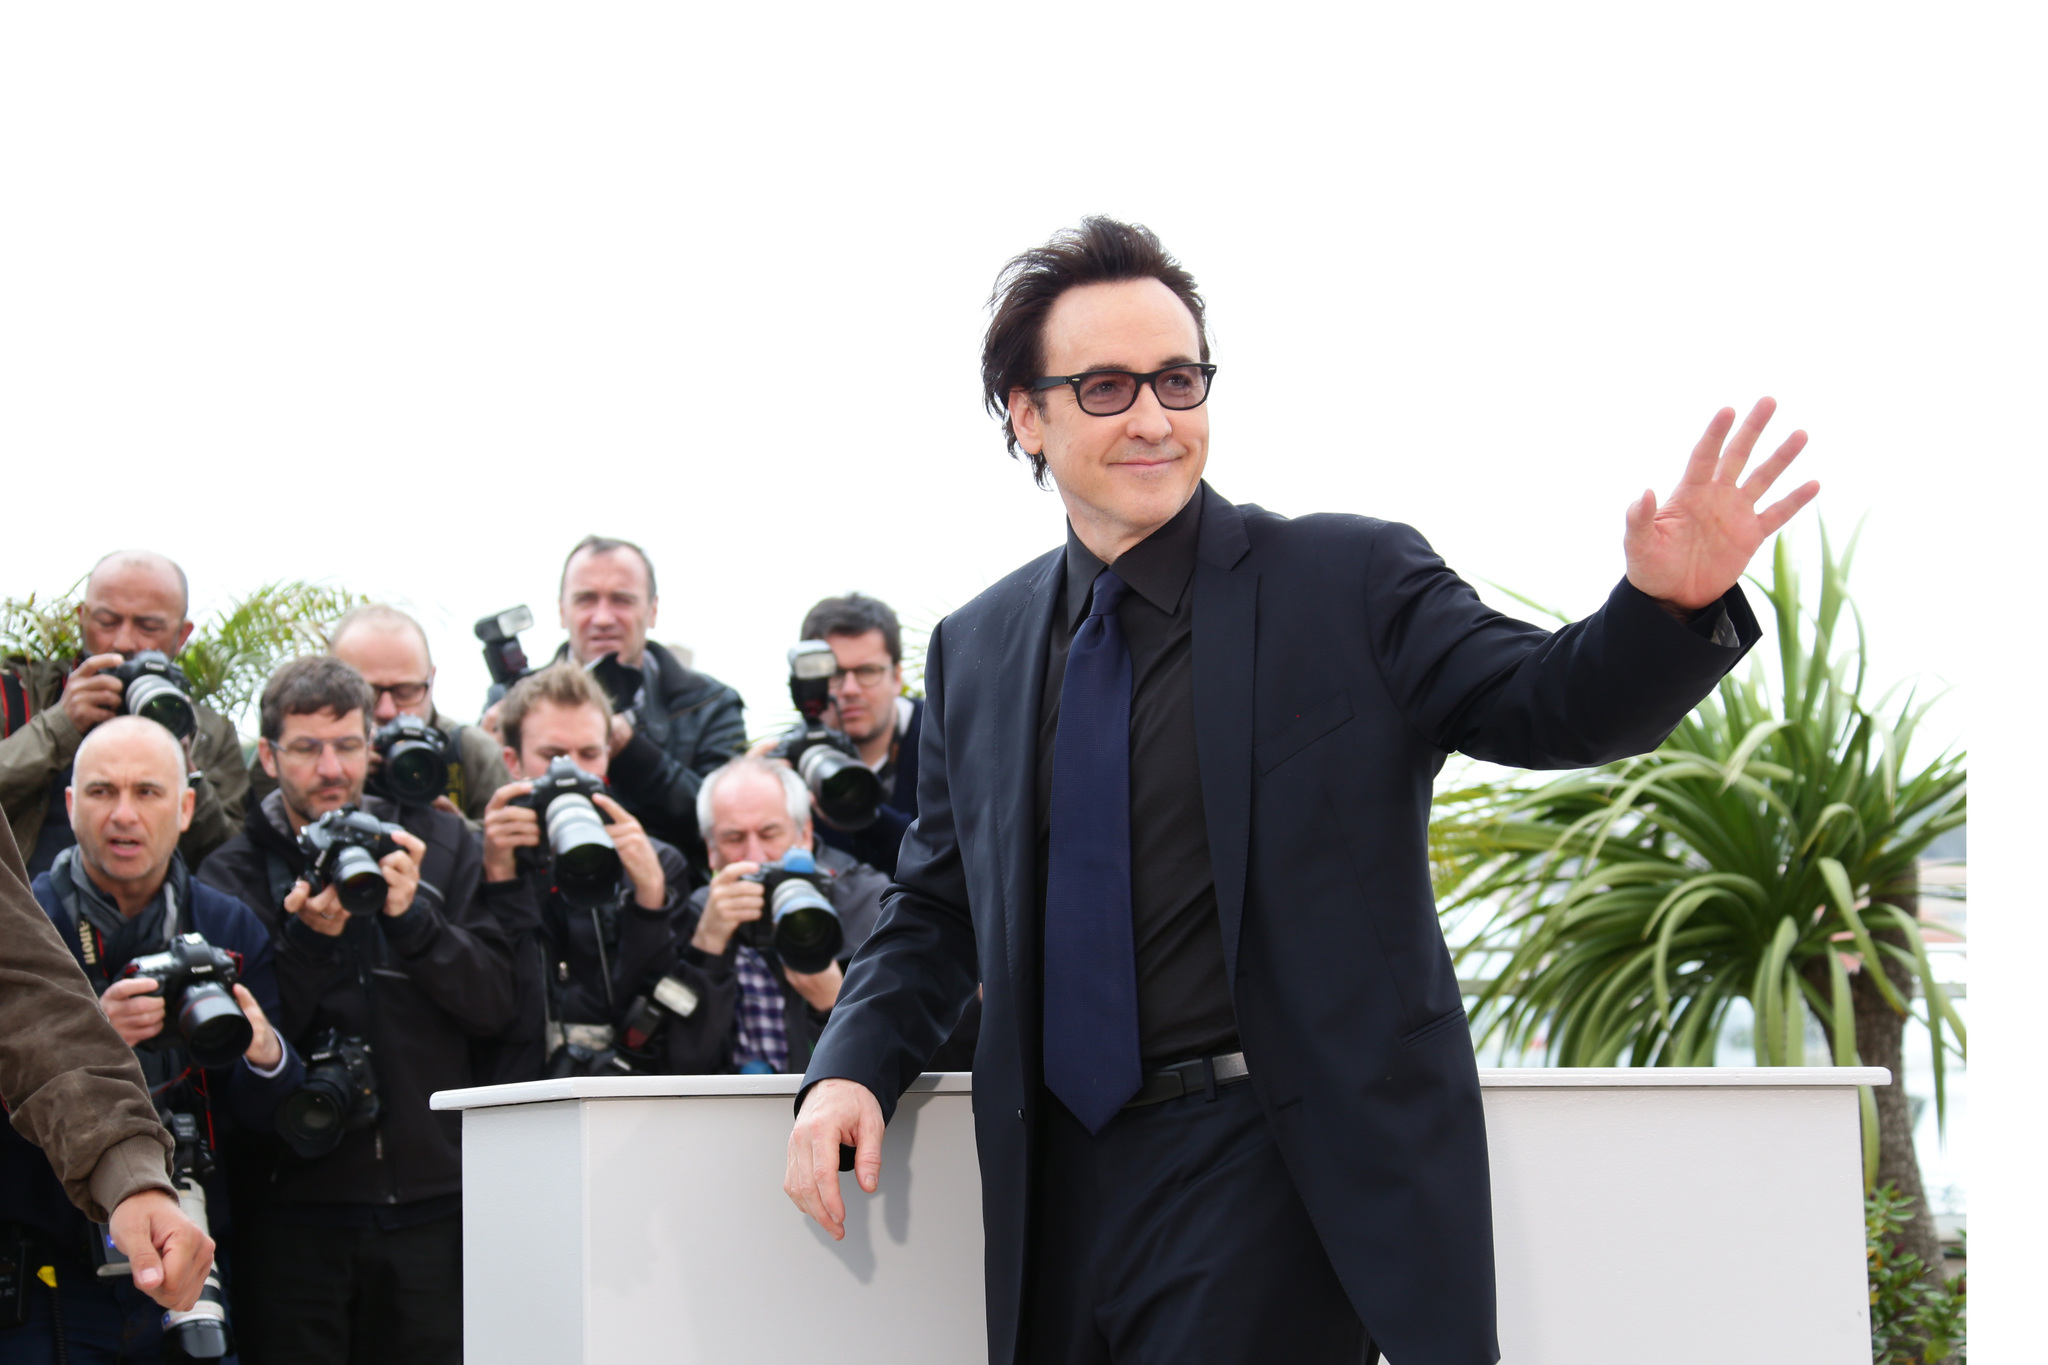 John Cusack at event of Maps to the Stars (2014)